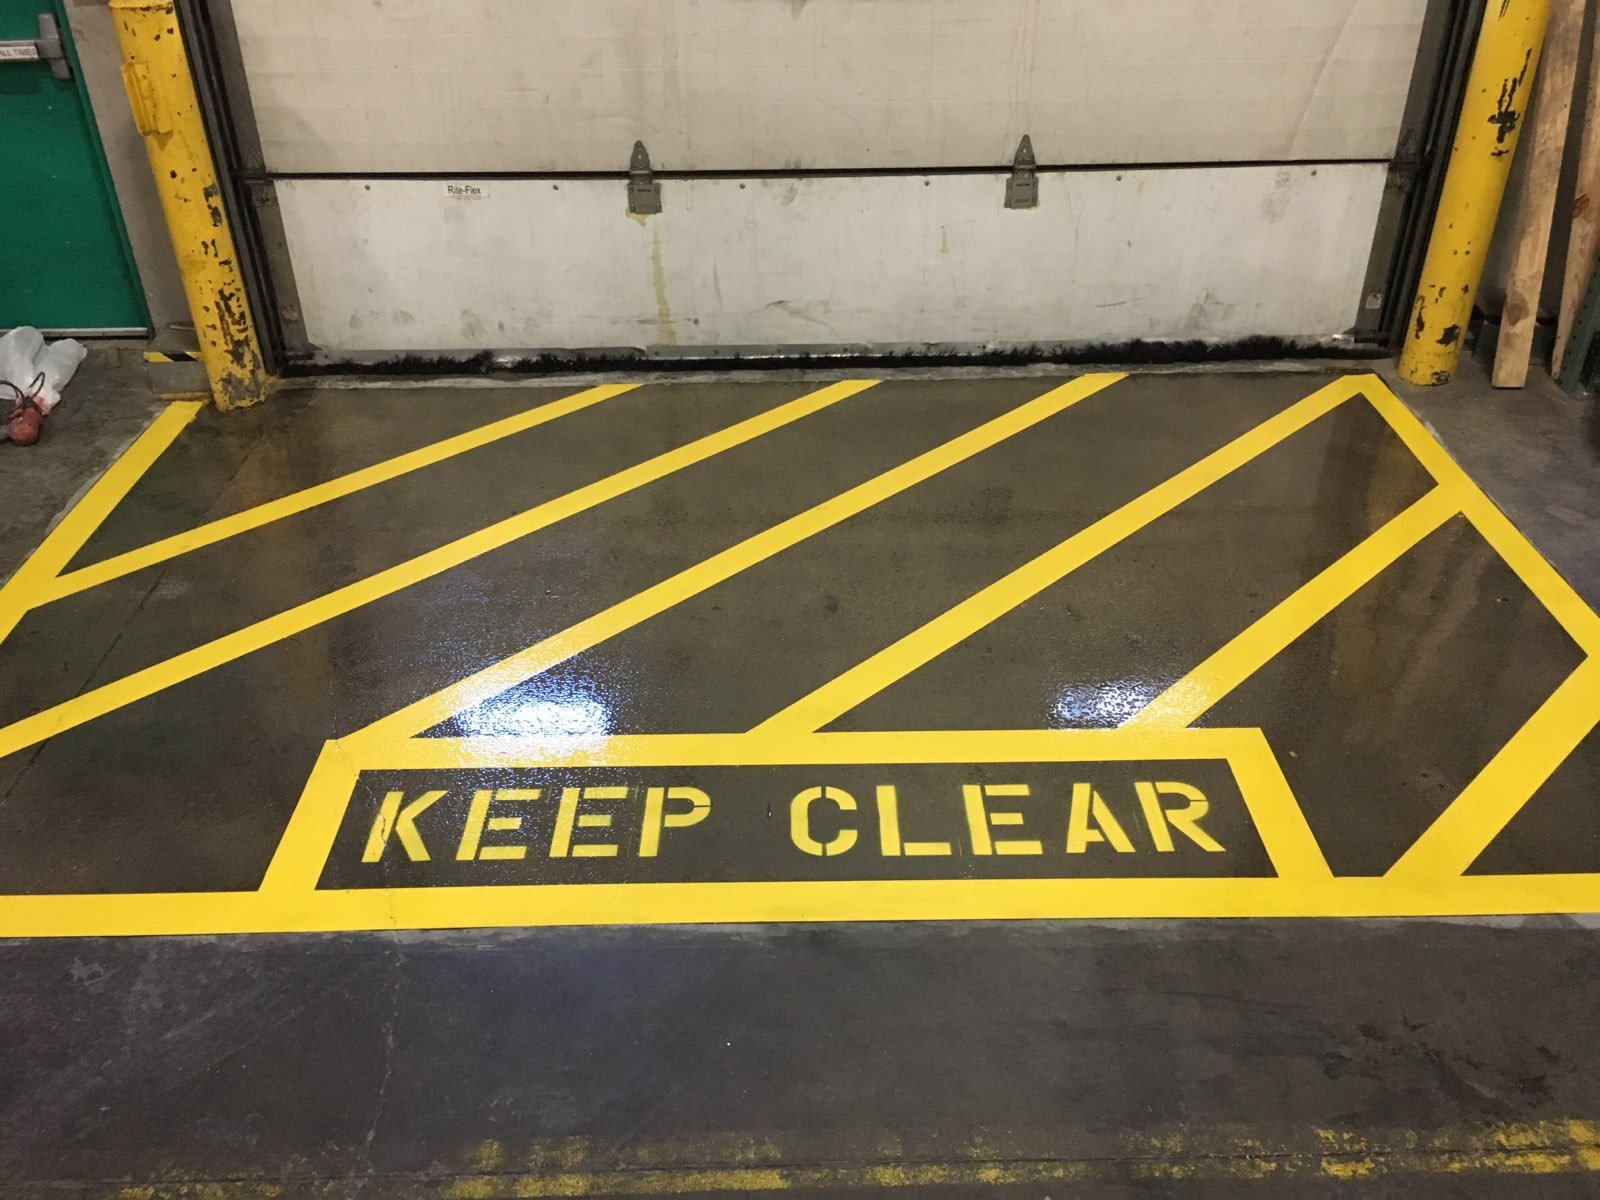 Keep clear lable in front of dock door